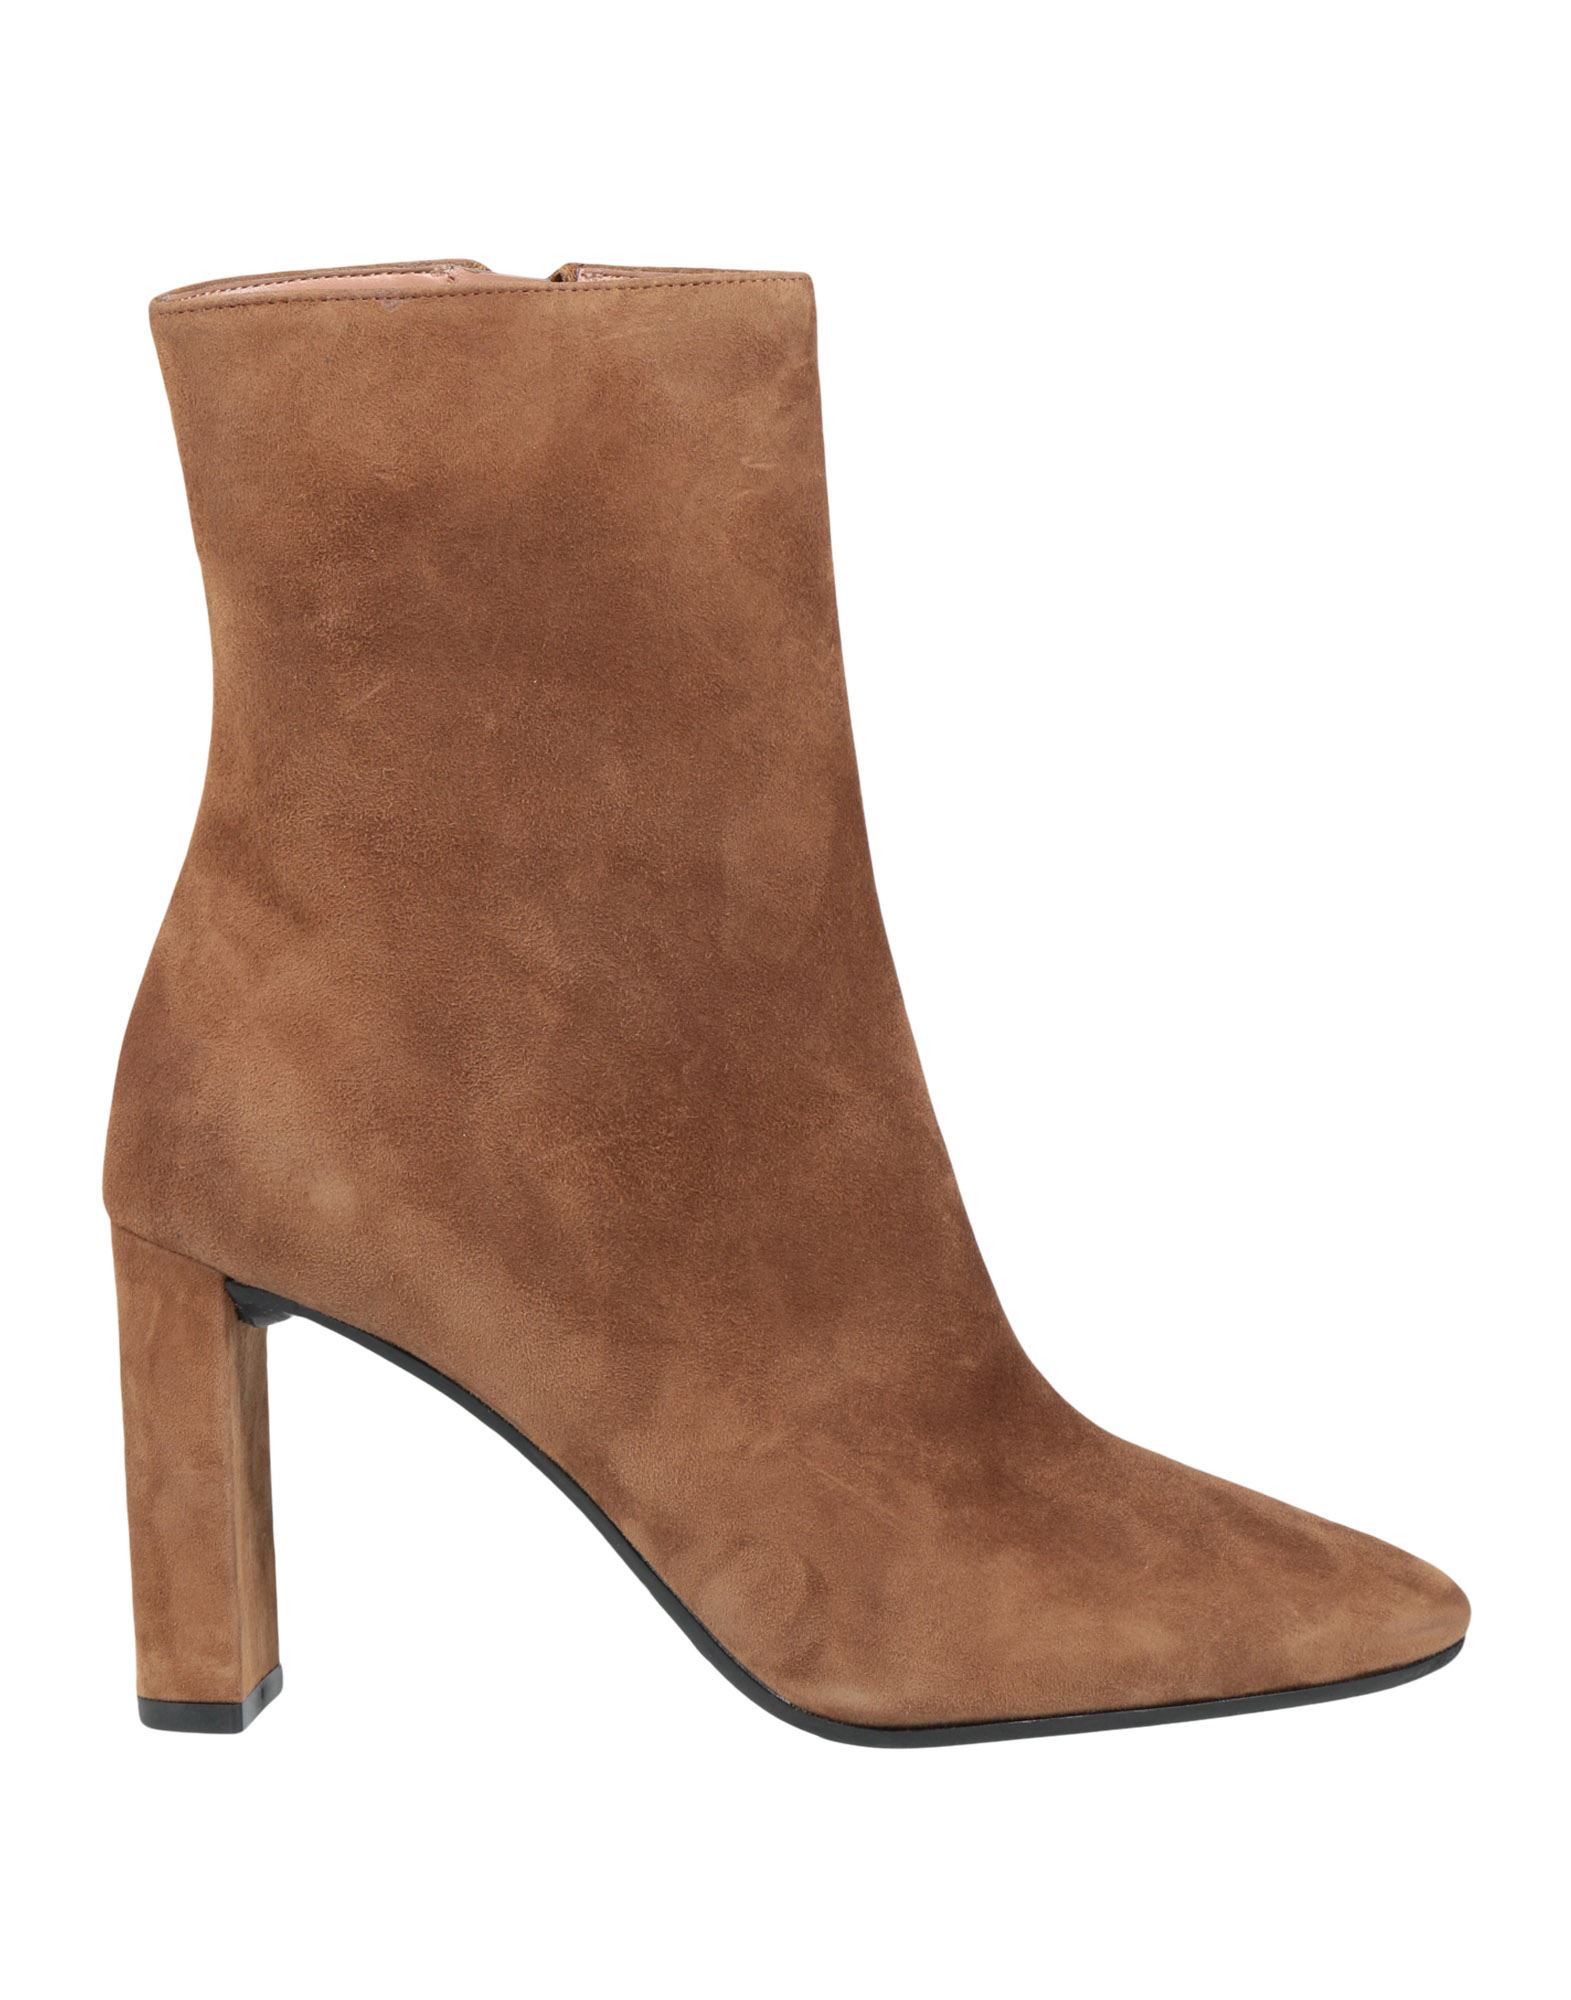 BIANCA DI BIANCA DI WOMAN ANKLE BOOTS CAMEL SIZE 10 SOFT LEATHER